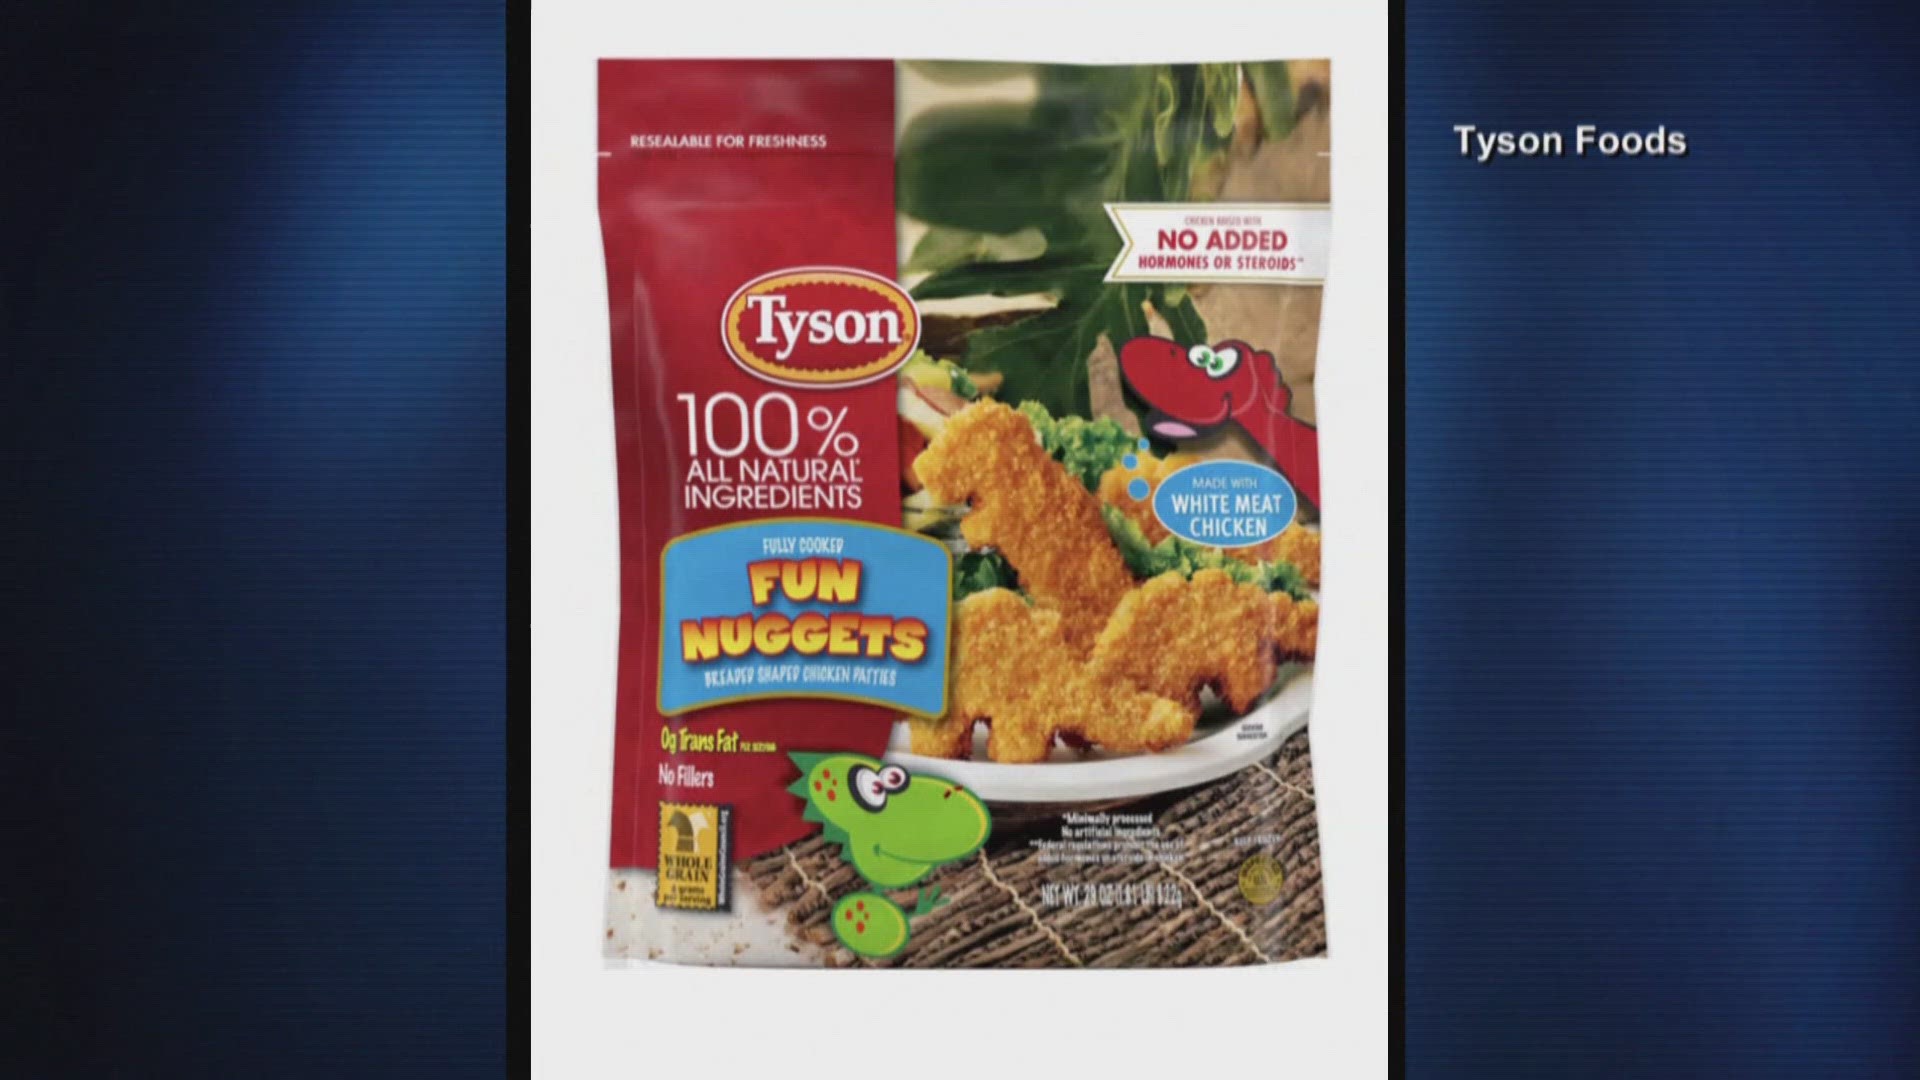 Tyson Foods is recalling nearly 30,000 pounds of breaded chicken 'Fun Nuggets' after consumers complained of finding metal pieces in the dinosaur-shaped nuggets.